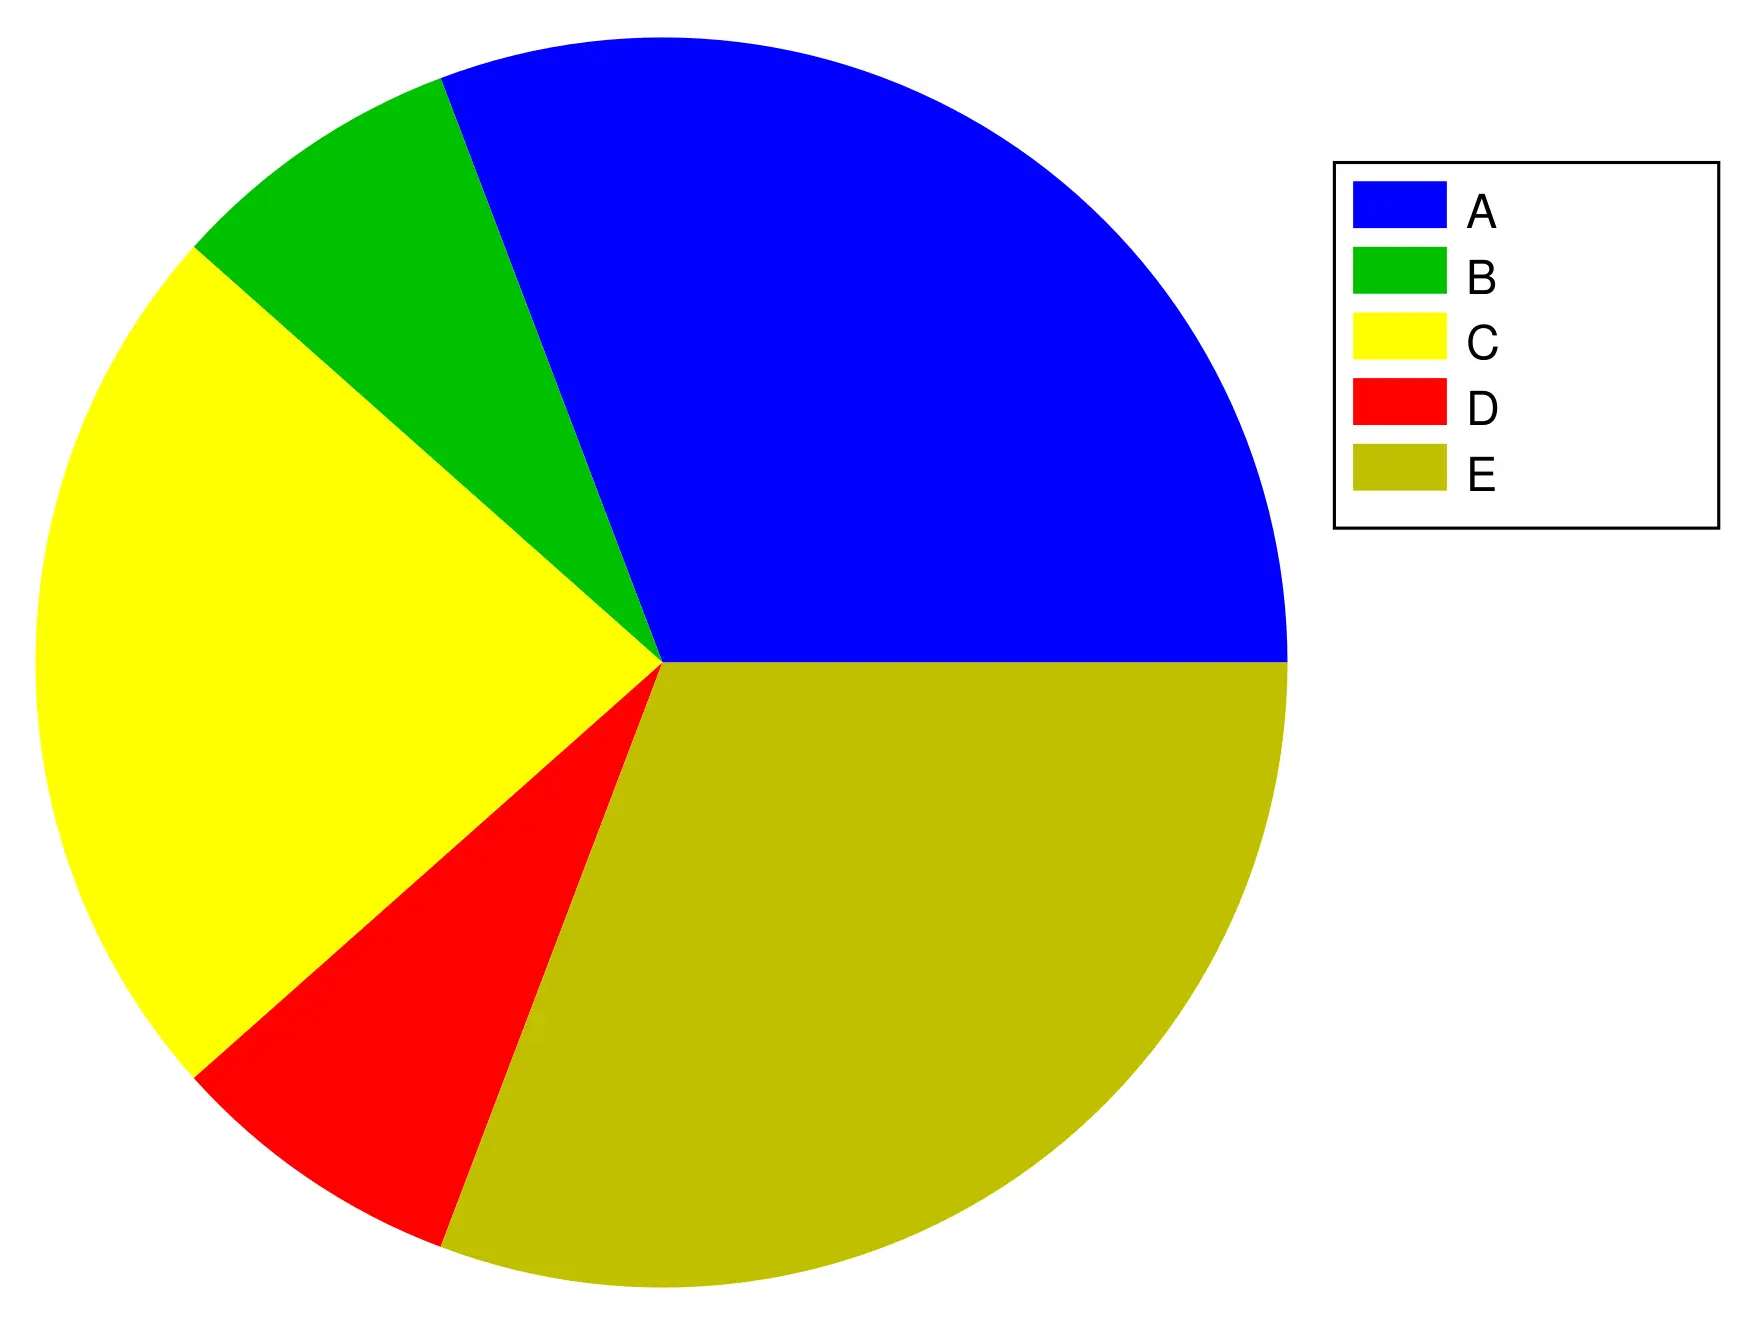 a colorful pie chart with a number of different colors